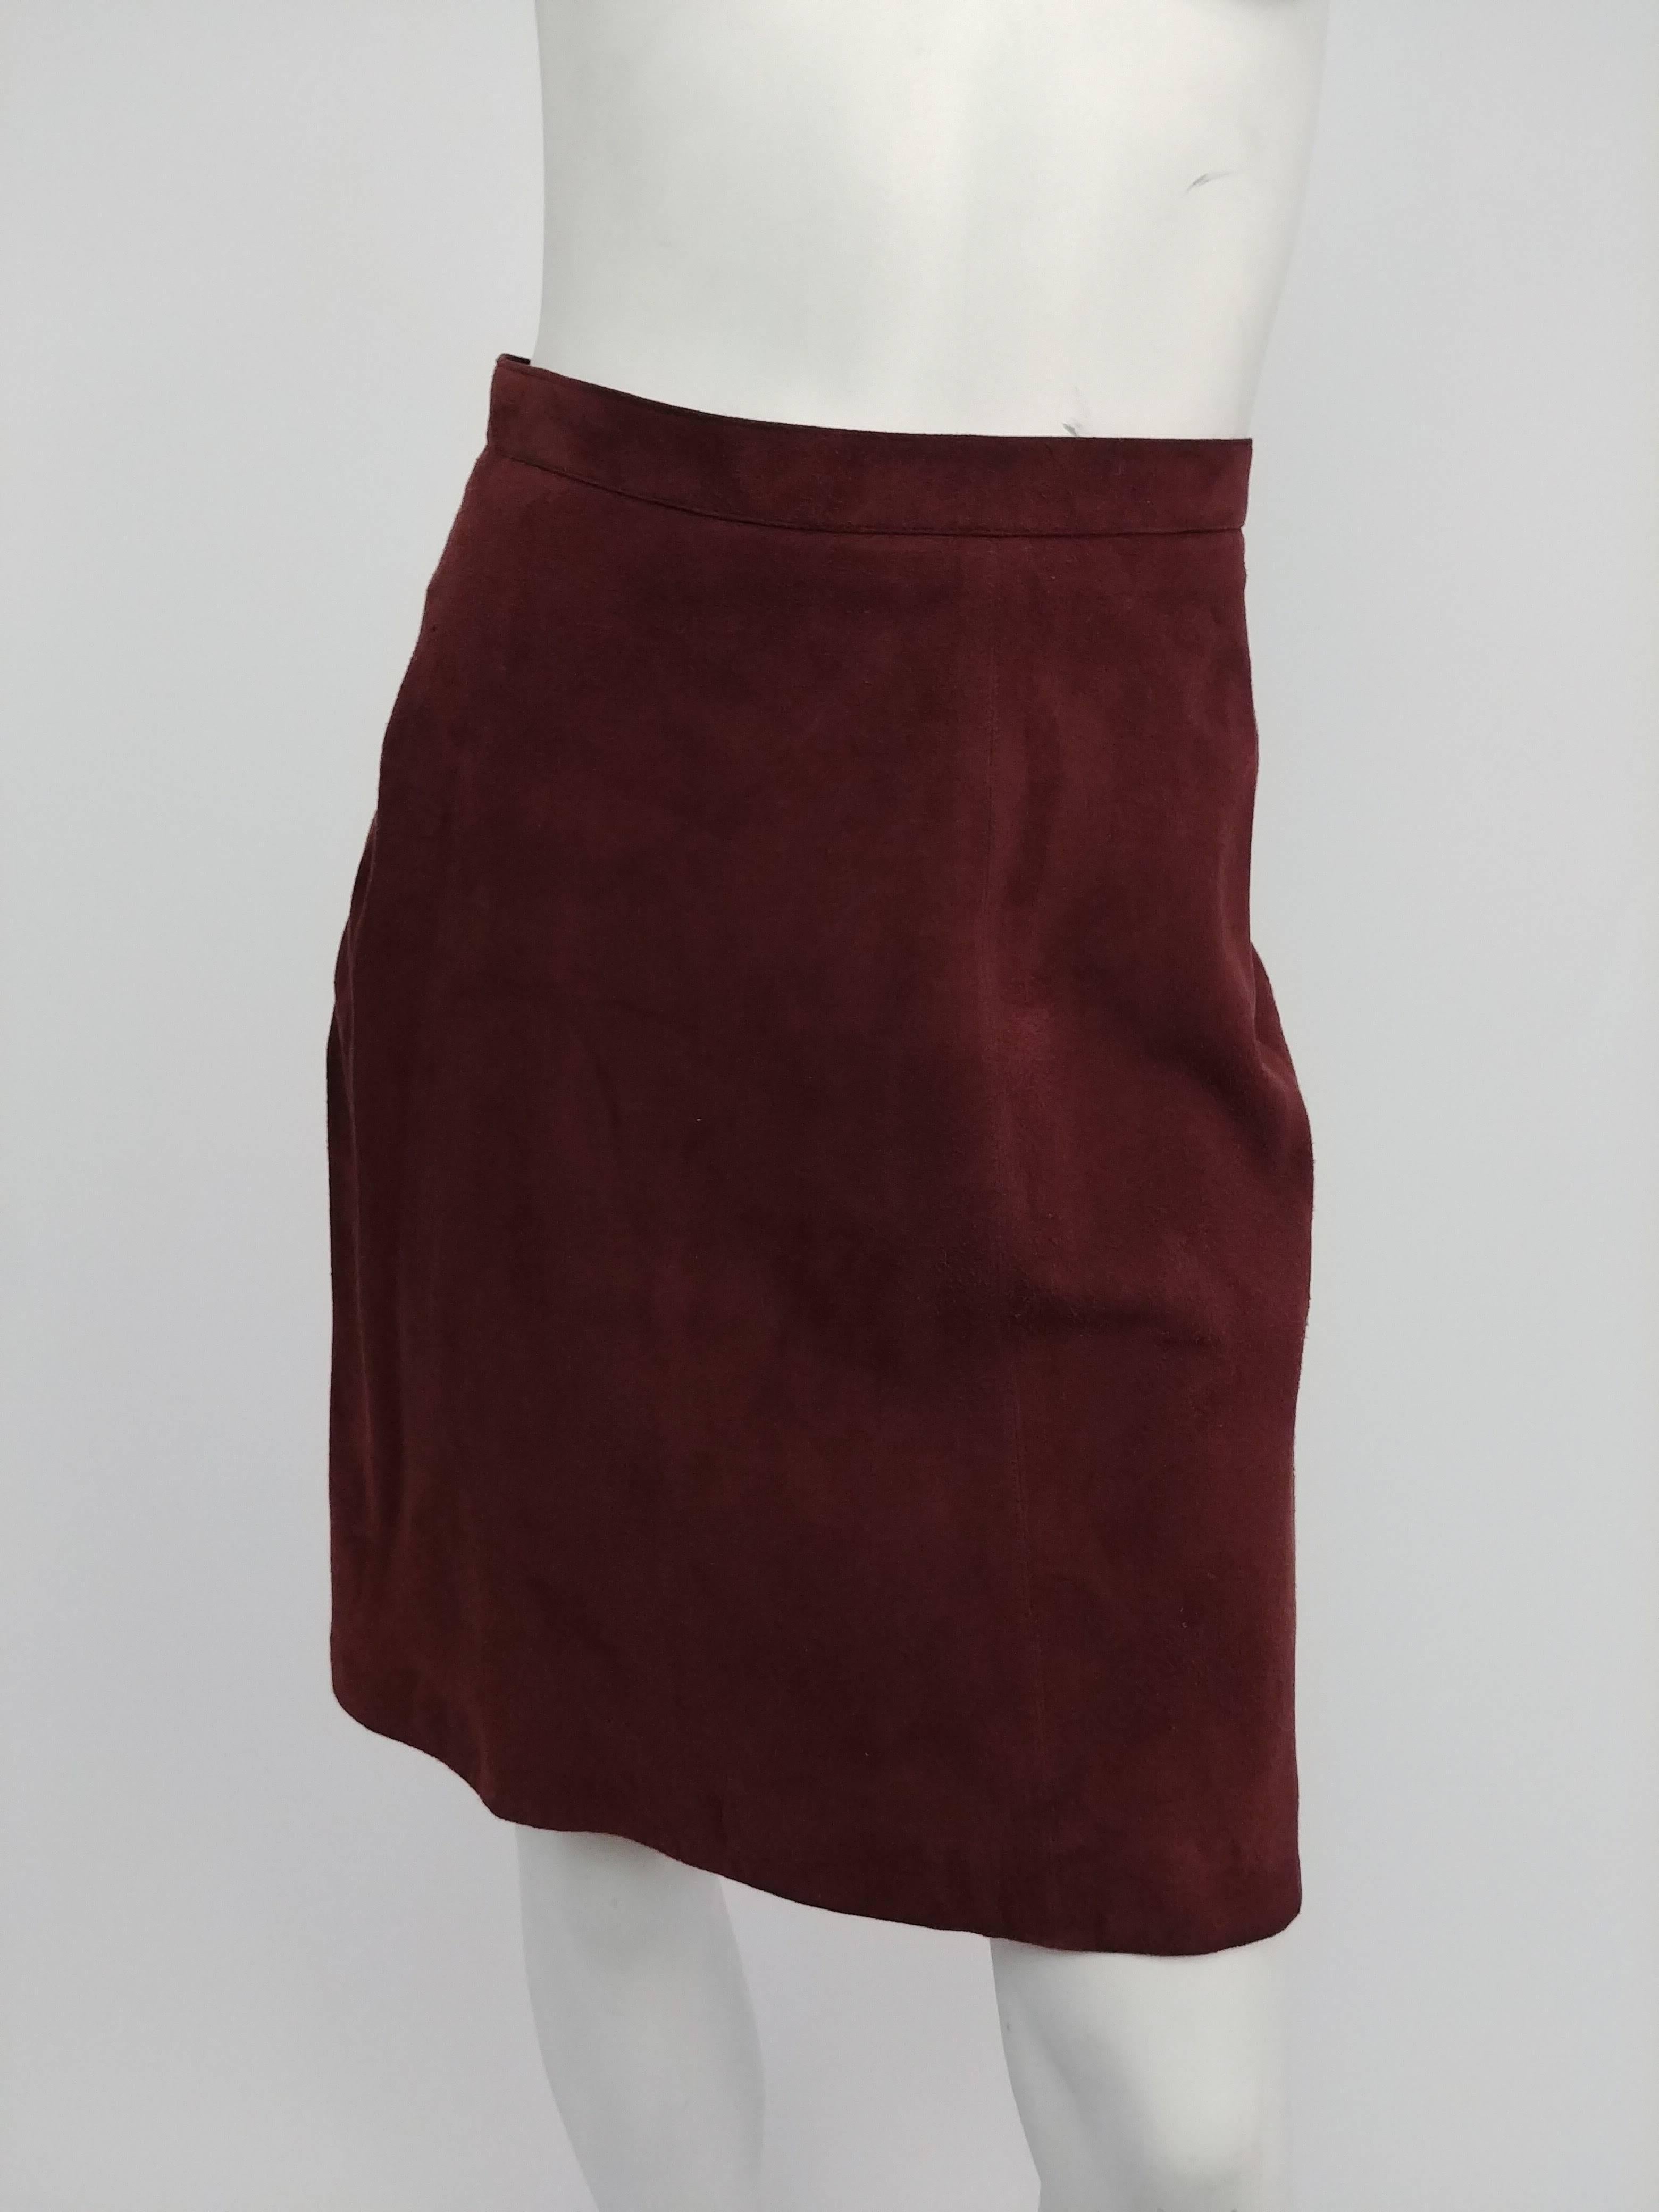 1990s Alaia Brown Vegan Suede Back Pleat Skirt. Brown suede skirt hits above the knee with A-line flare. All the details are at the back of the skirt, from flattering curved seam lines over to the bustle-like pleats. Zips up back and closes with a